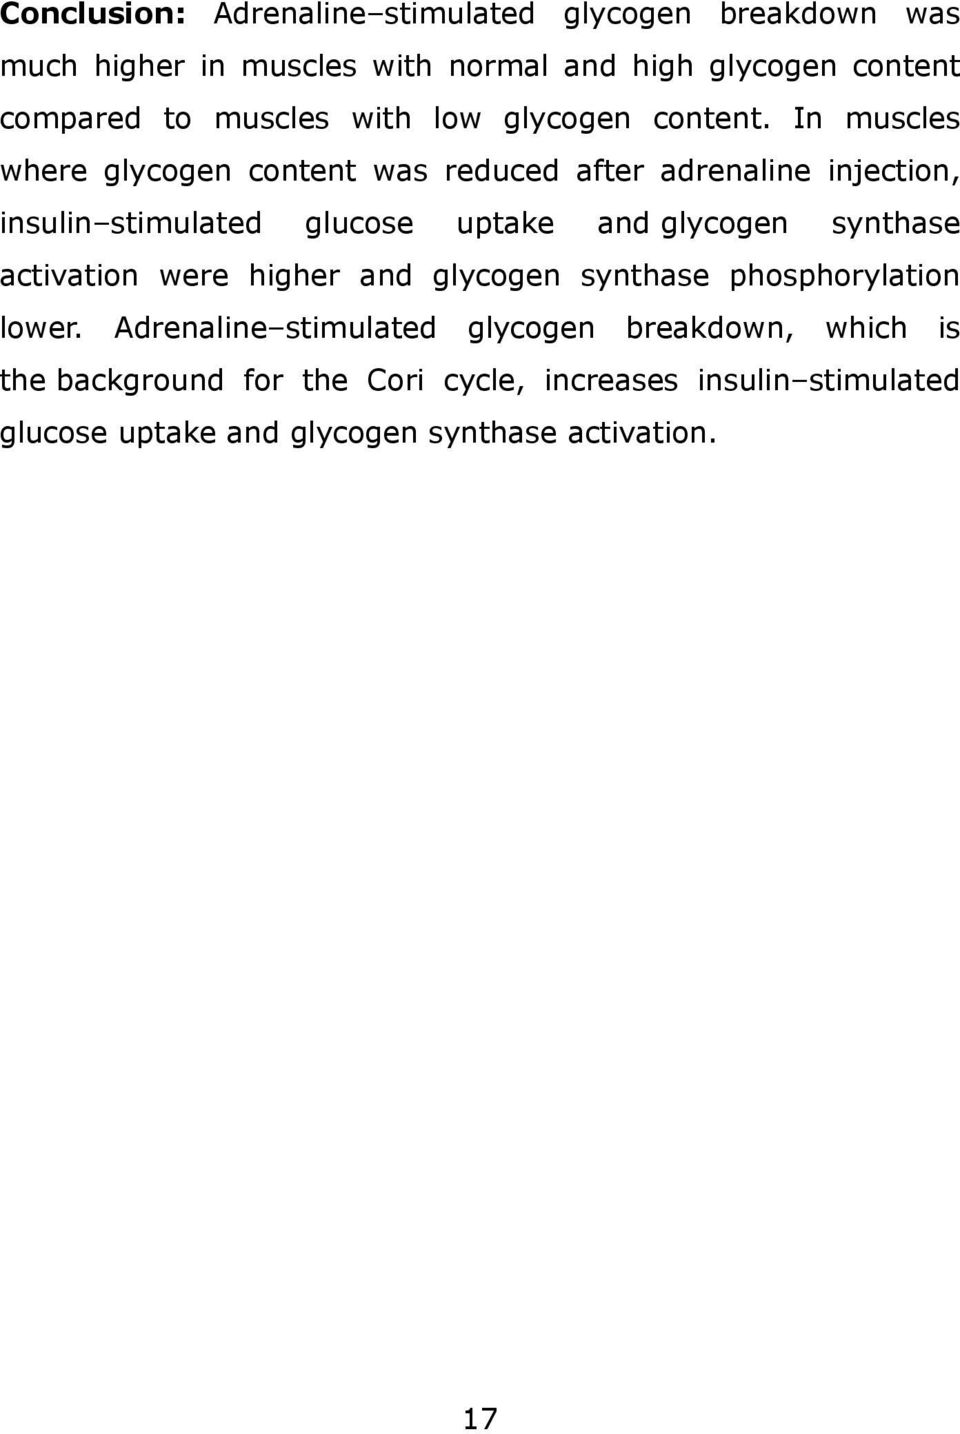 In muscles where glycogen content was reduced after adrenaline injection, insulin stimulated glucose uptake and glycogen synthase